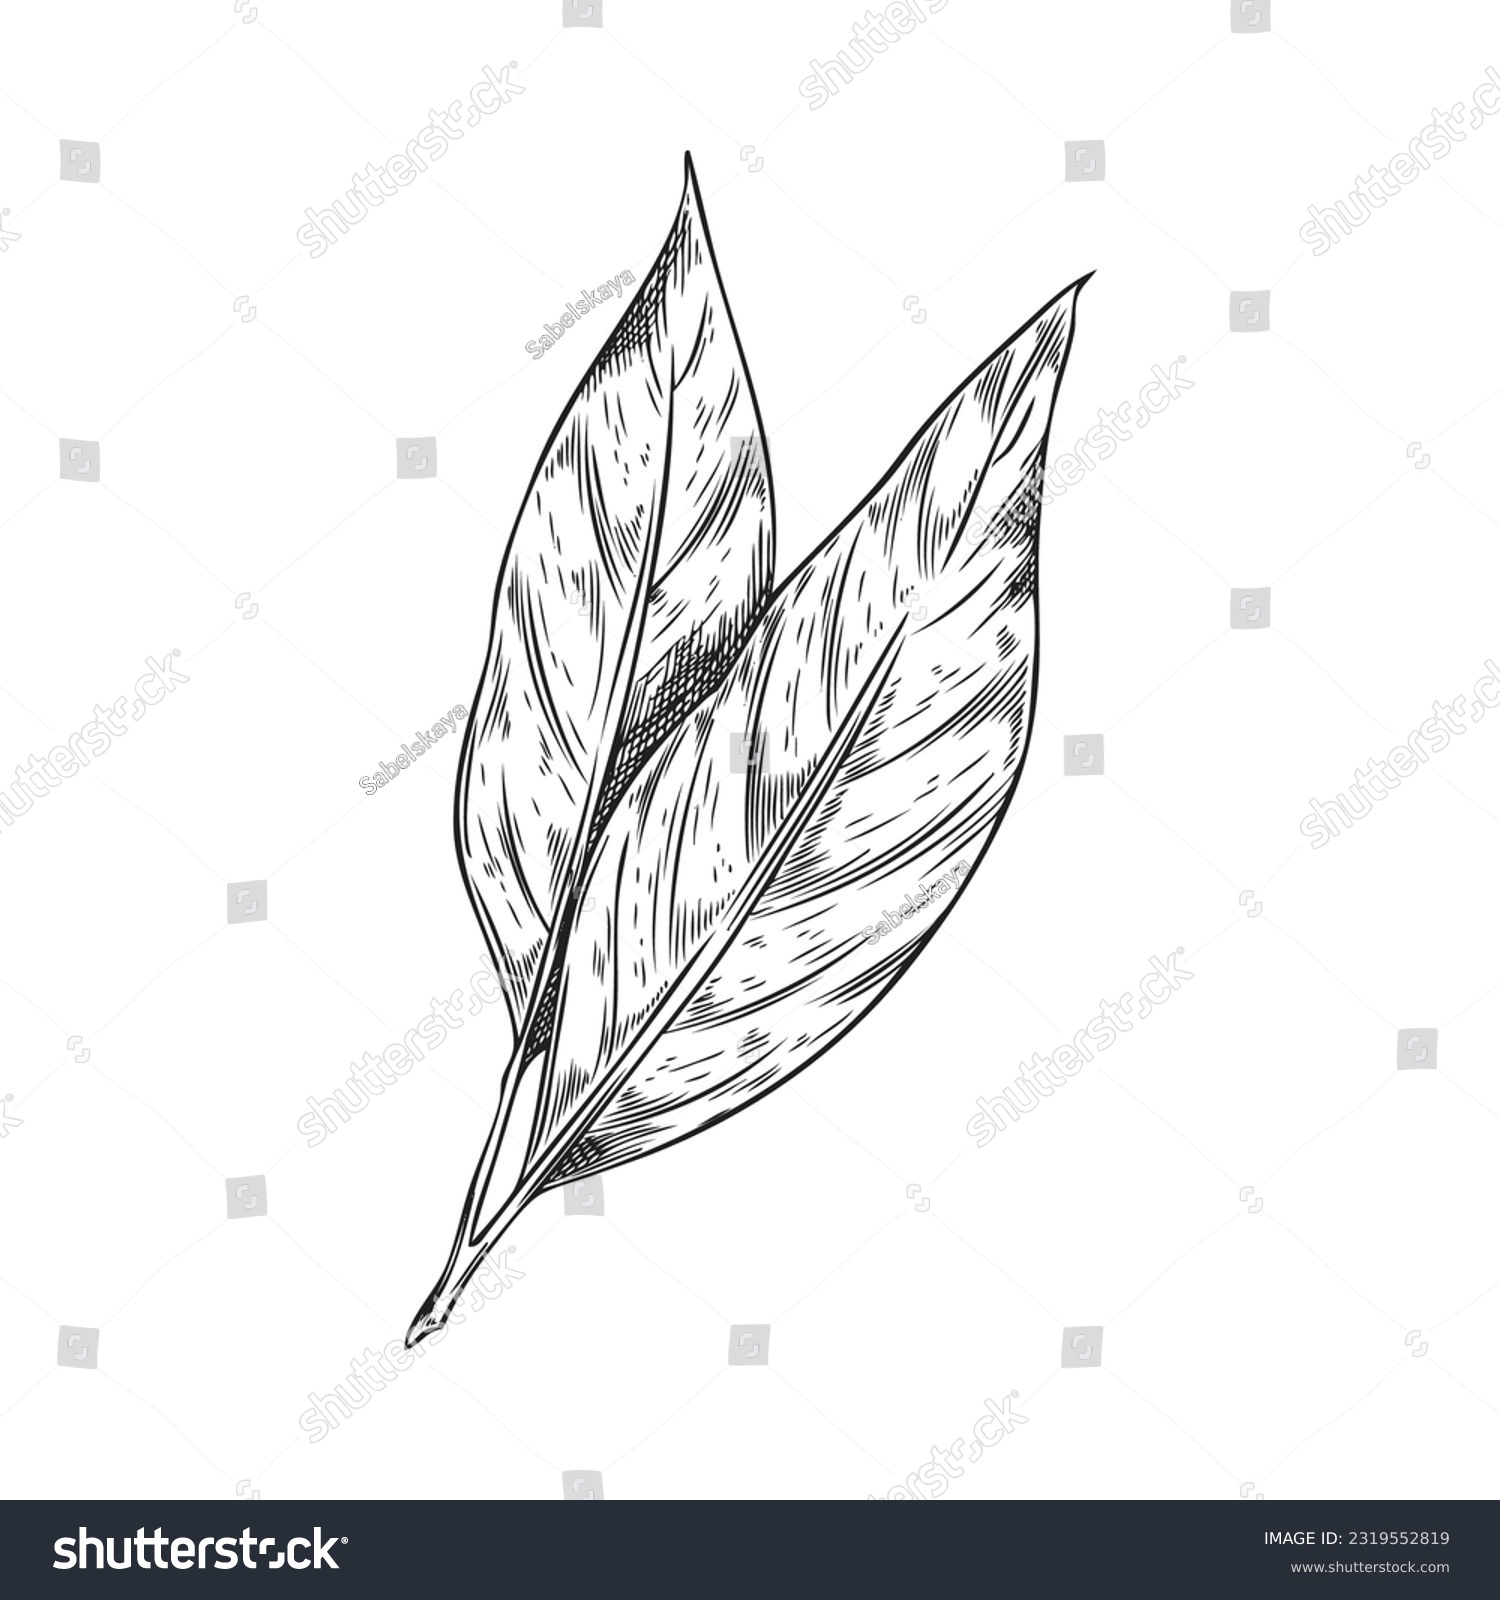 SVG of Hand drawn bay leaf plant, monochrome sketch vector illustration isolated on white background. Bay laurel leaves with engraving texture. Aromatic herb for cooking and food seasoning. svg